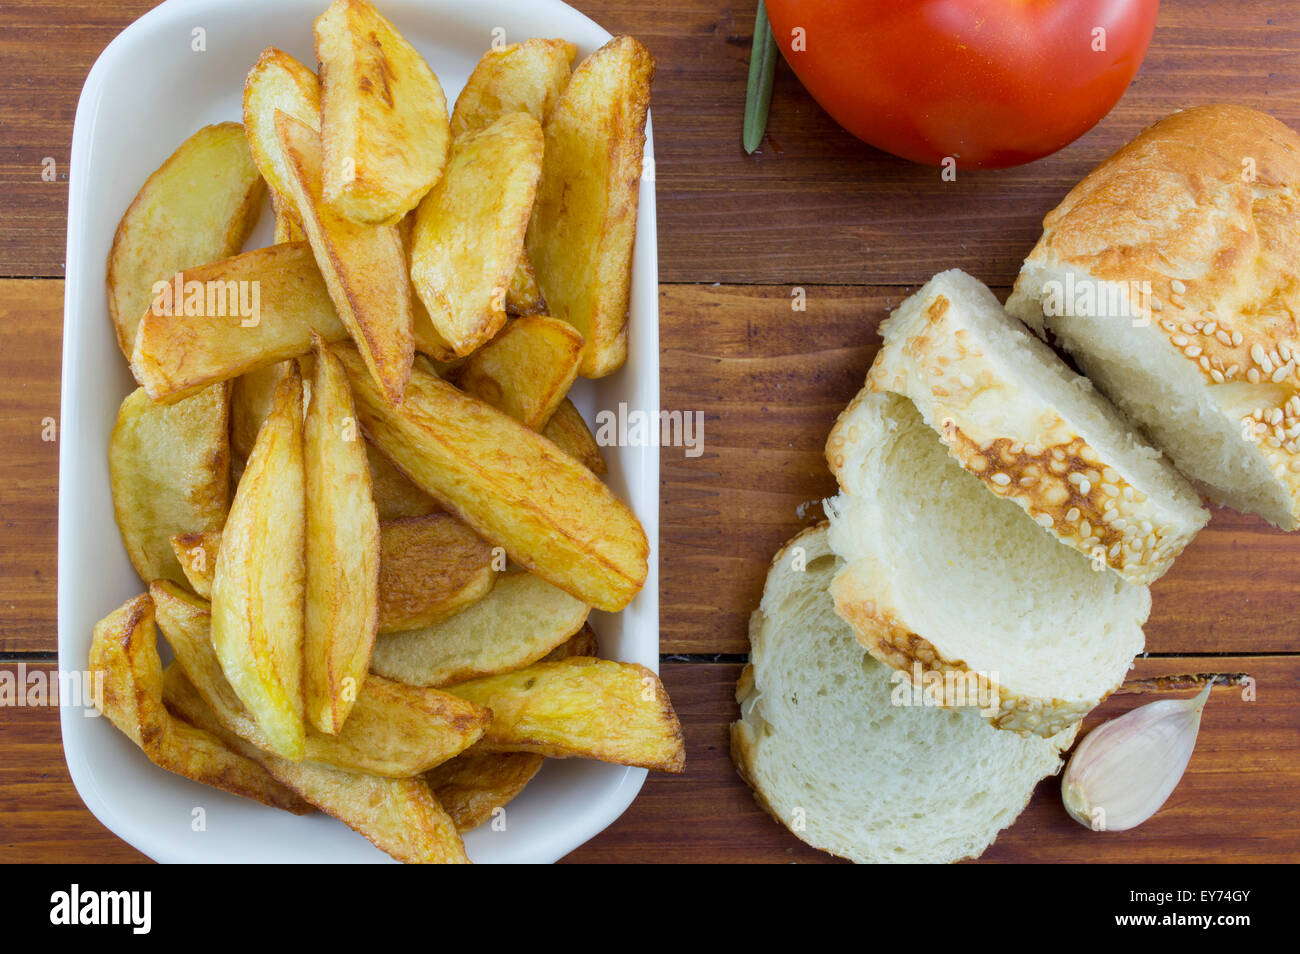 Homemade fried potatoes on a plate decorated with sliced bread, onion, and a tomato Stock Photo